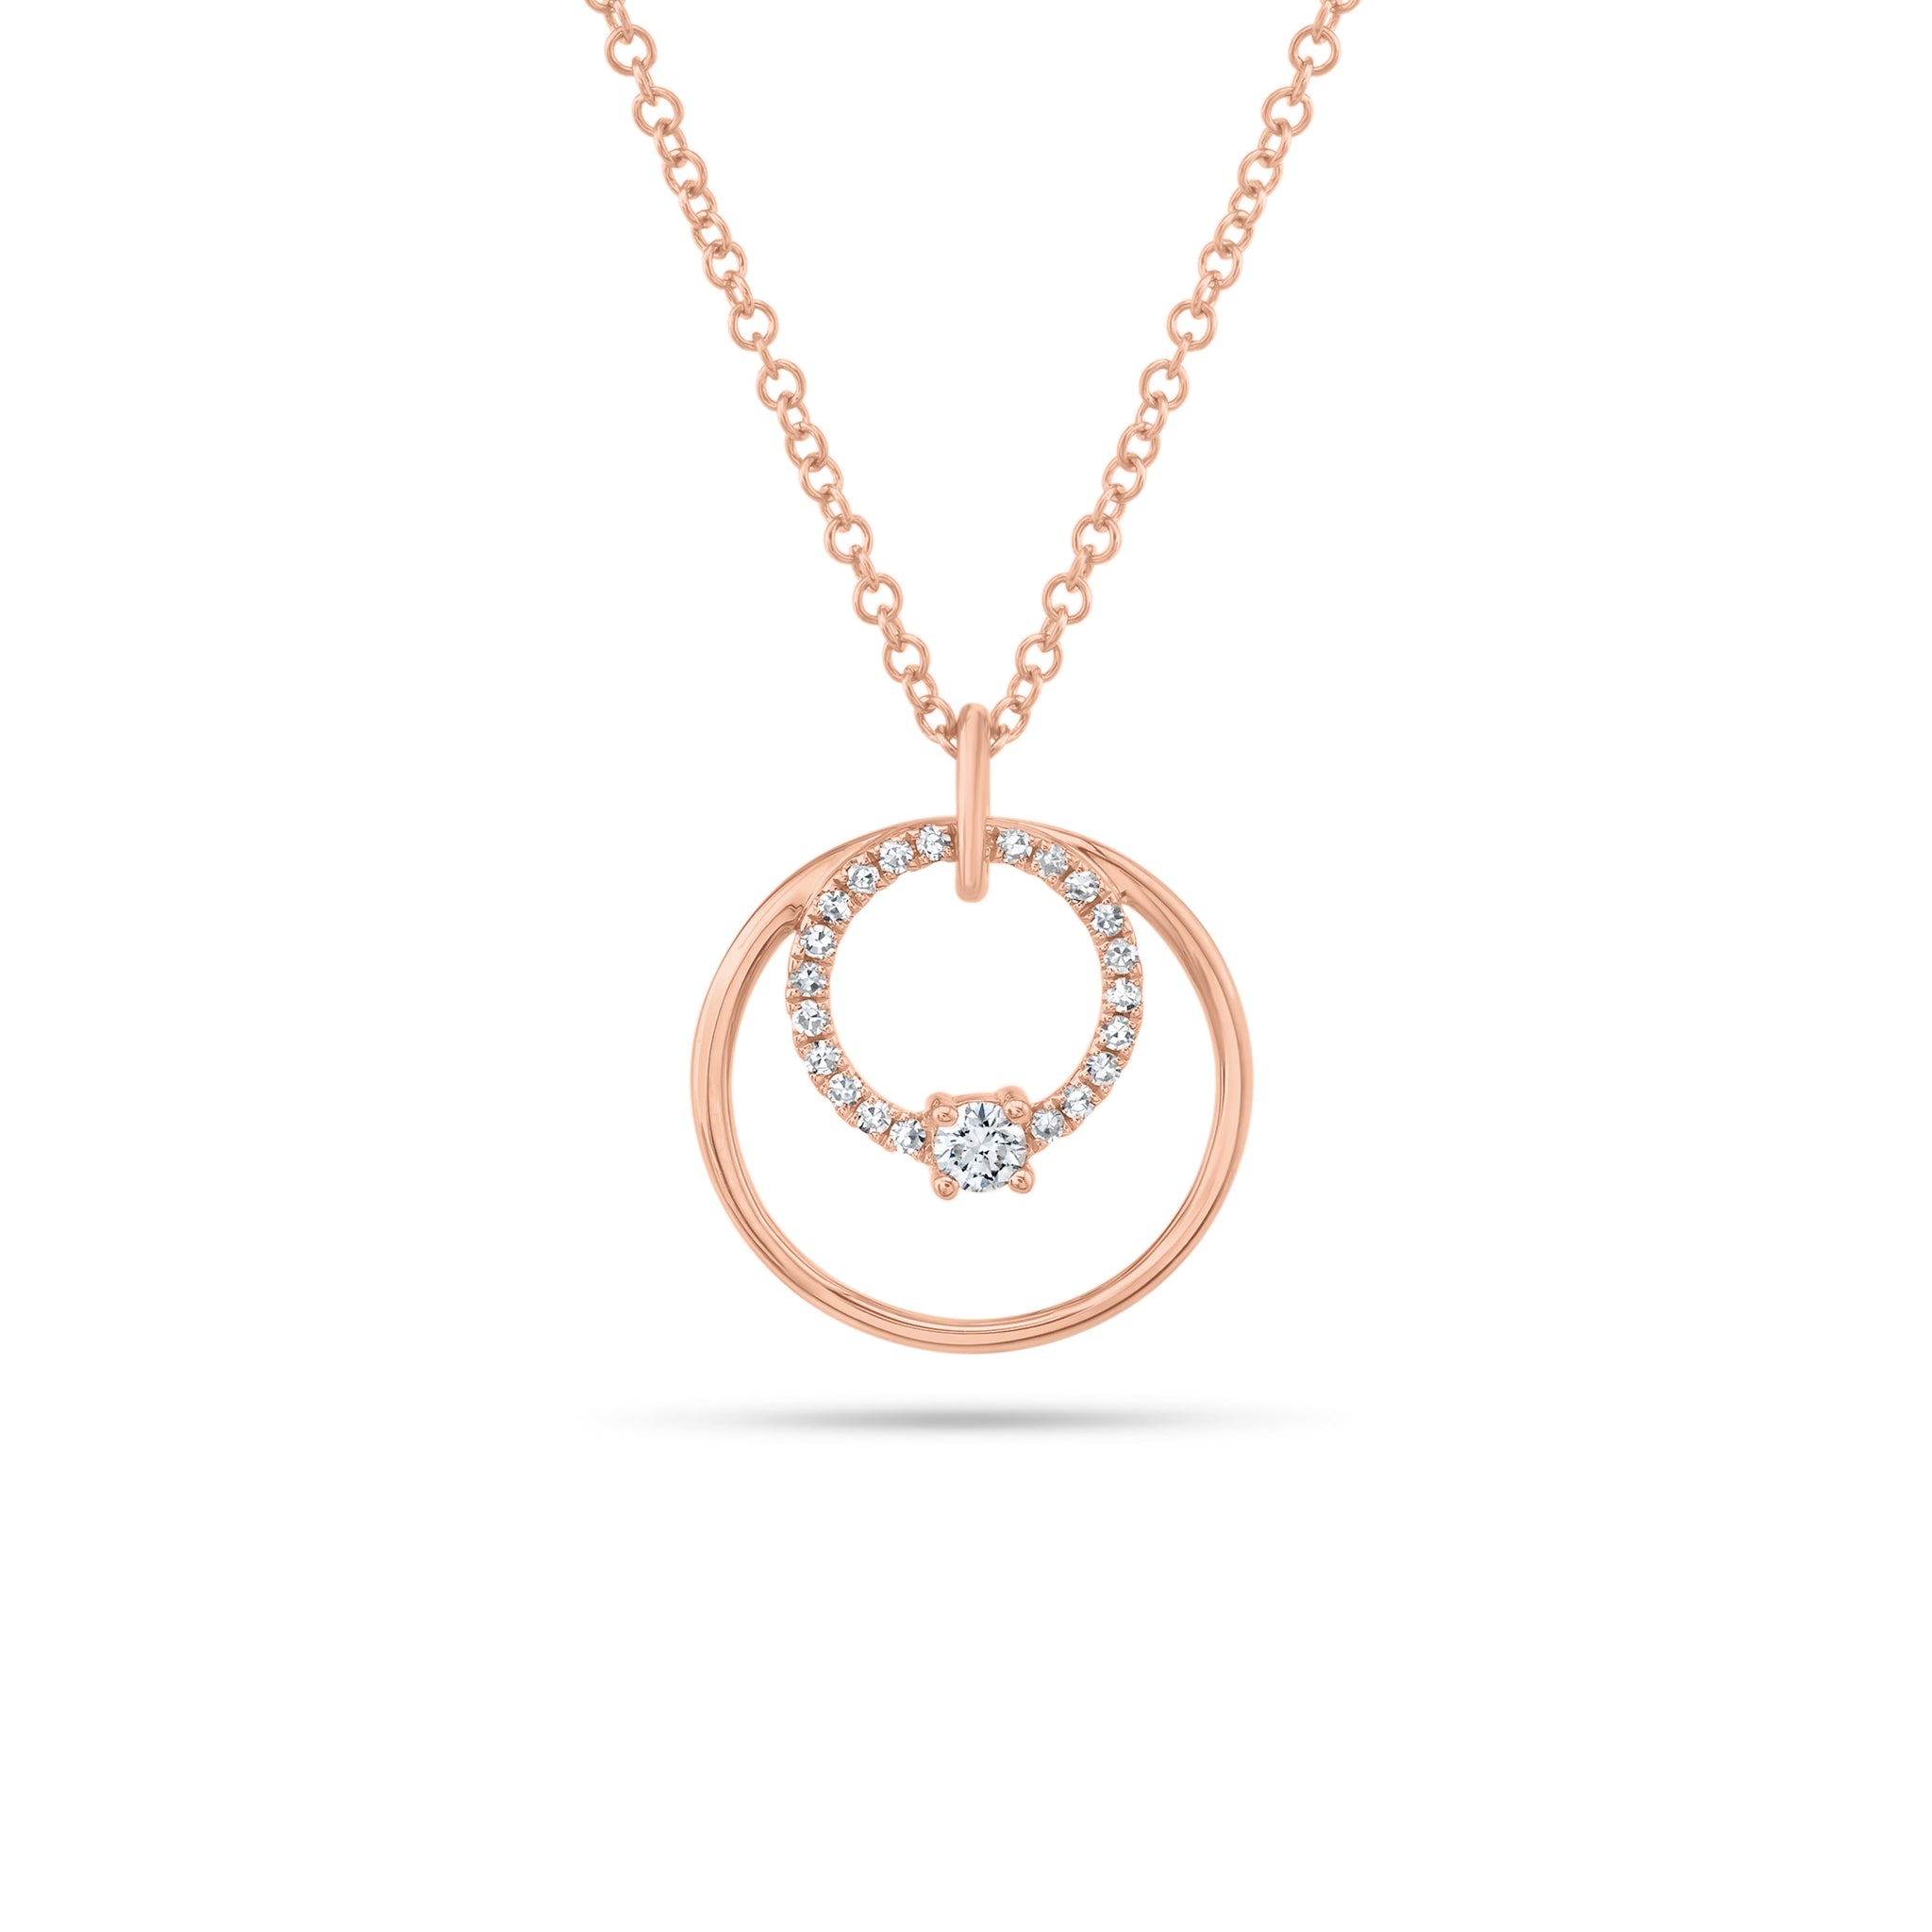 925 Rose Gold Plated Silver Reversible Medallion Necklace | The Ring Austin  | Round Rock, TX